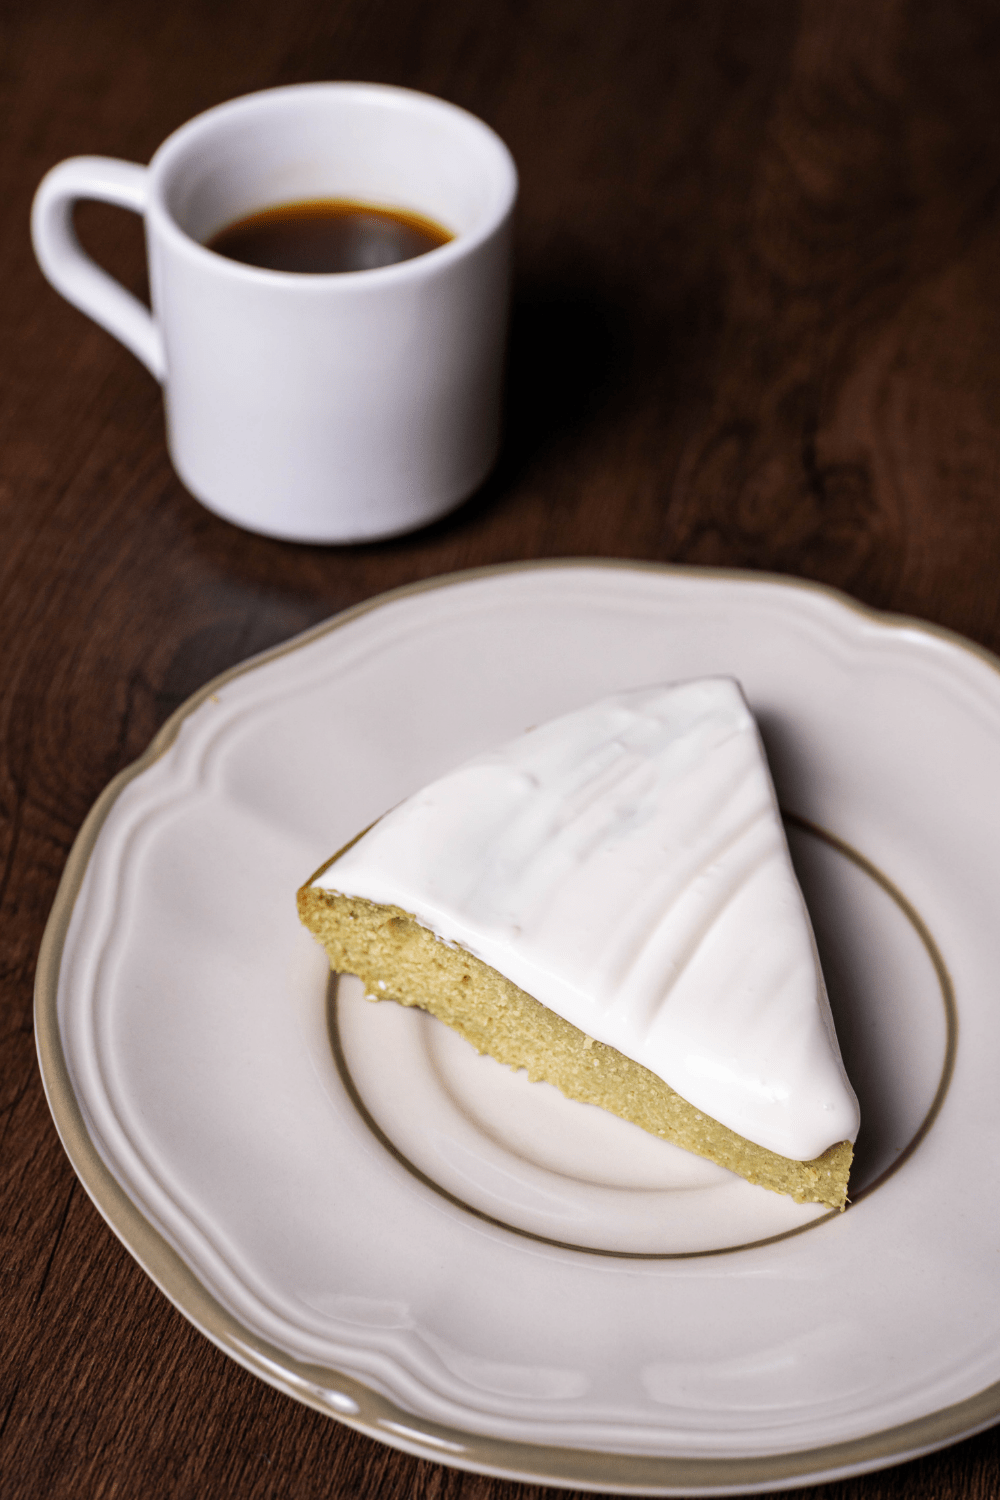 A slice of key lime cake with a cup of coffee